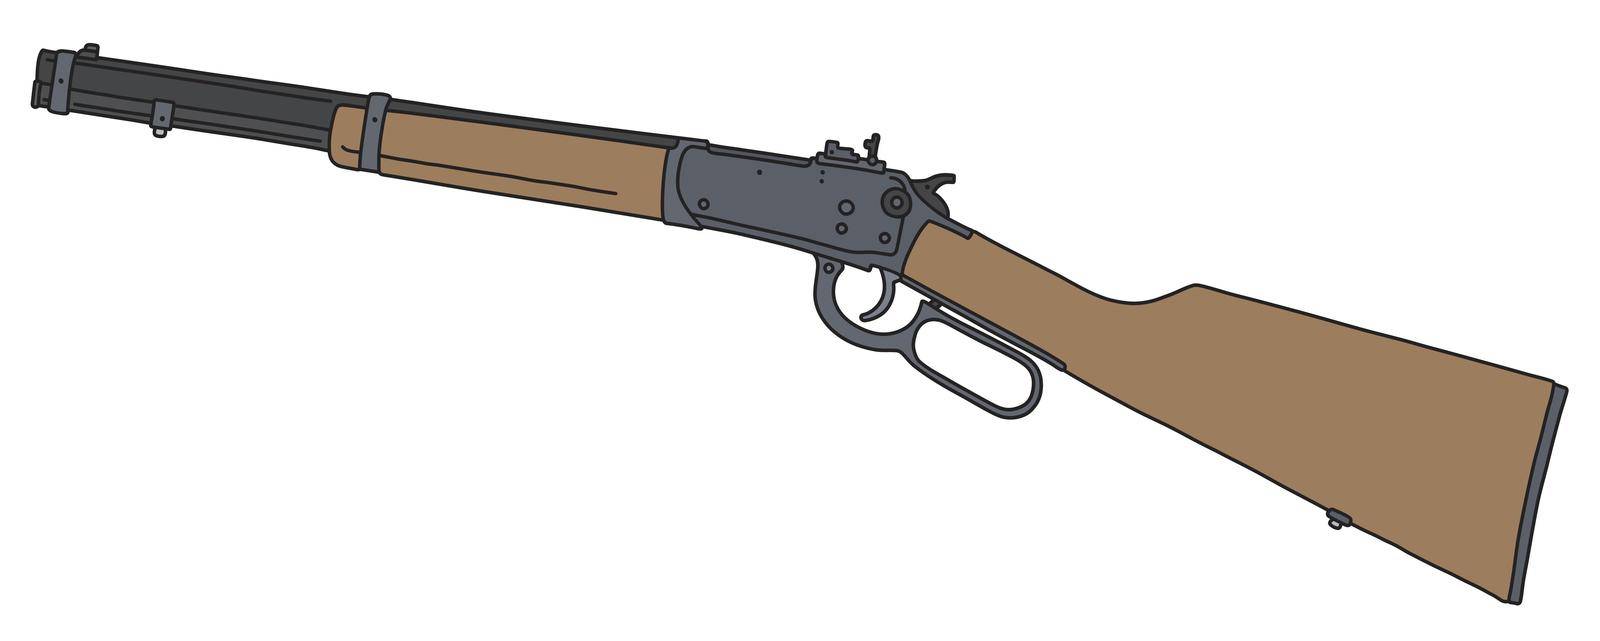 The winchester repeating rifle by vostal